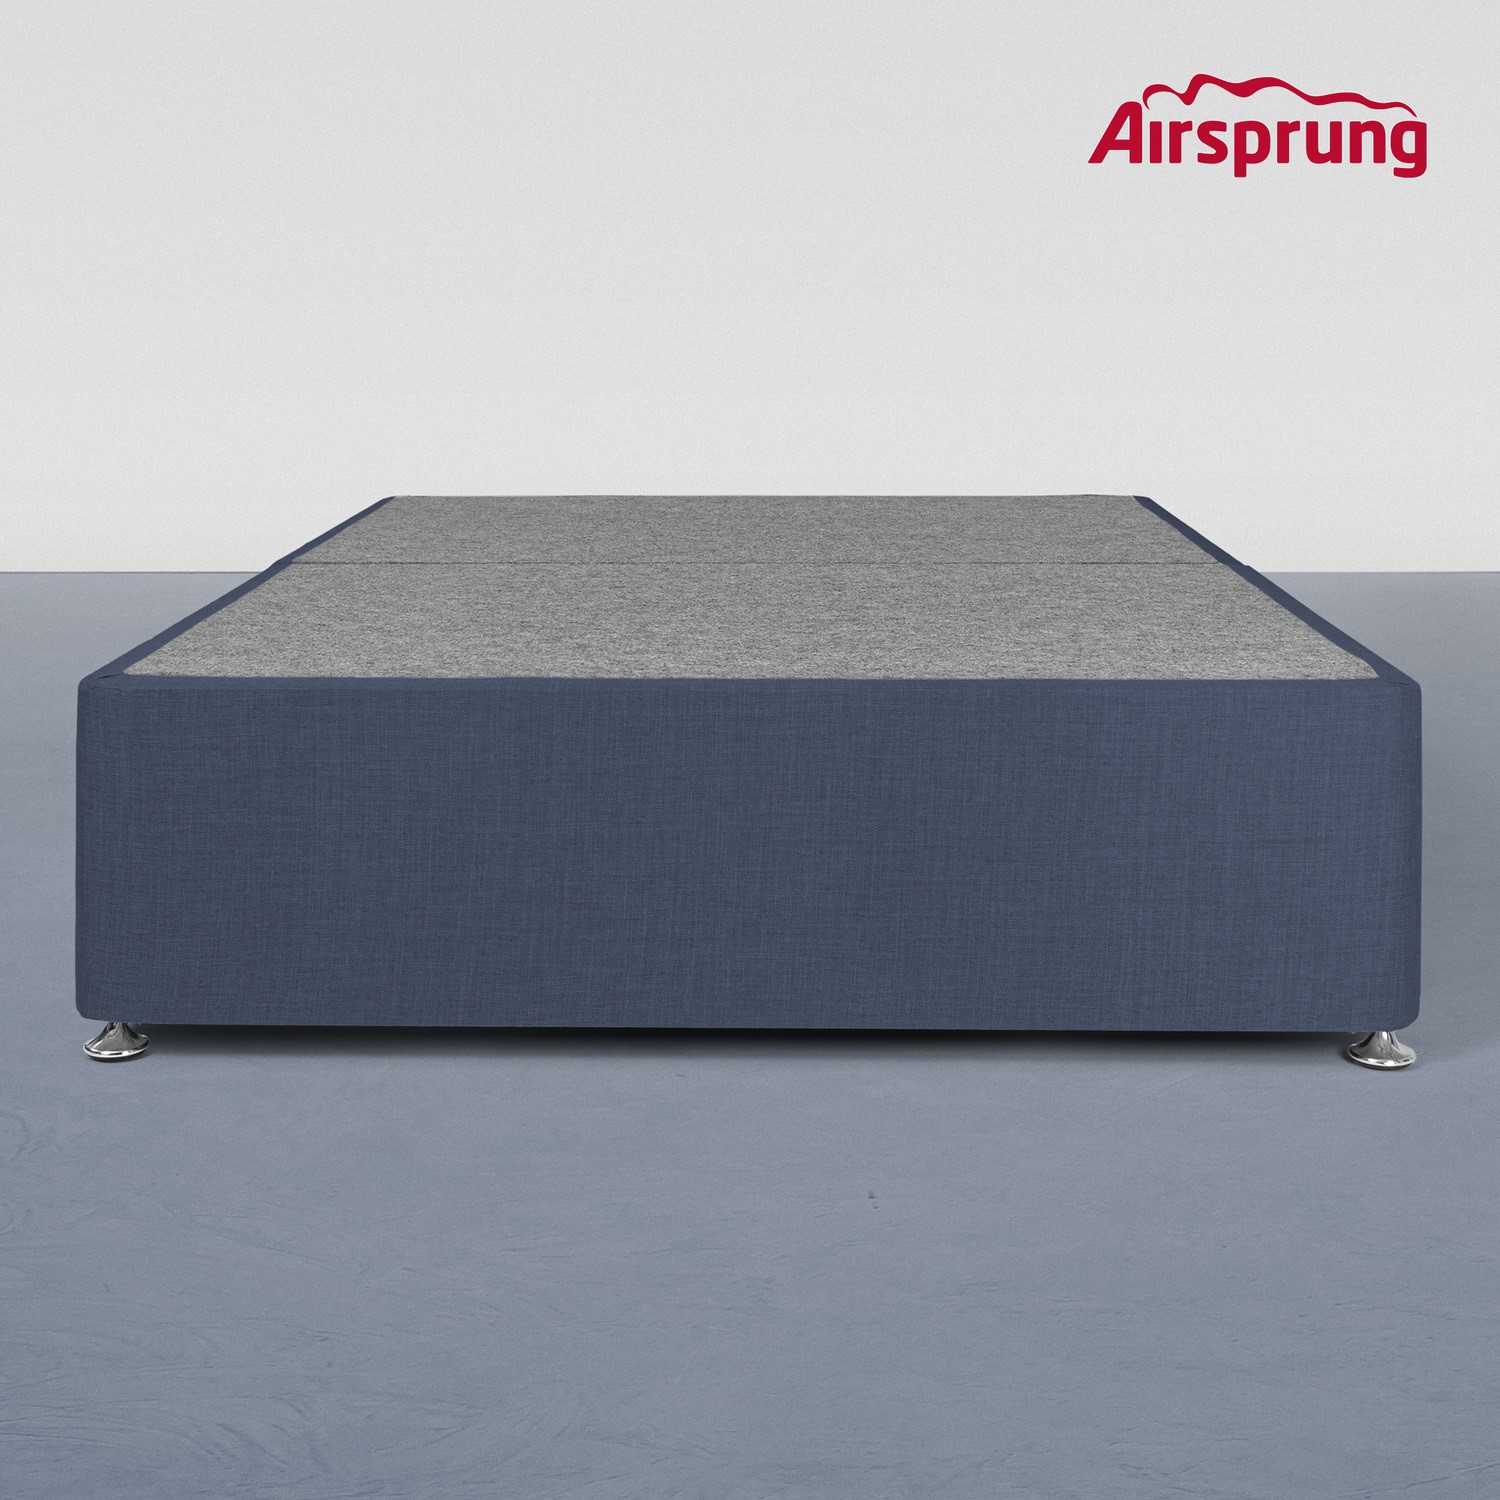 Read more about Airsprung kelston double 2 drawer divan midnight blue